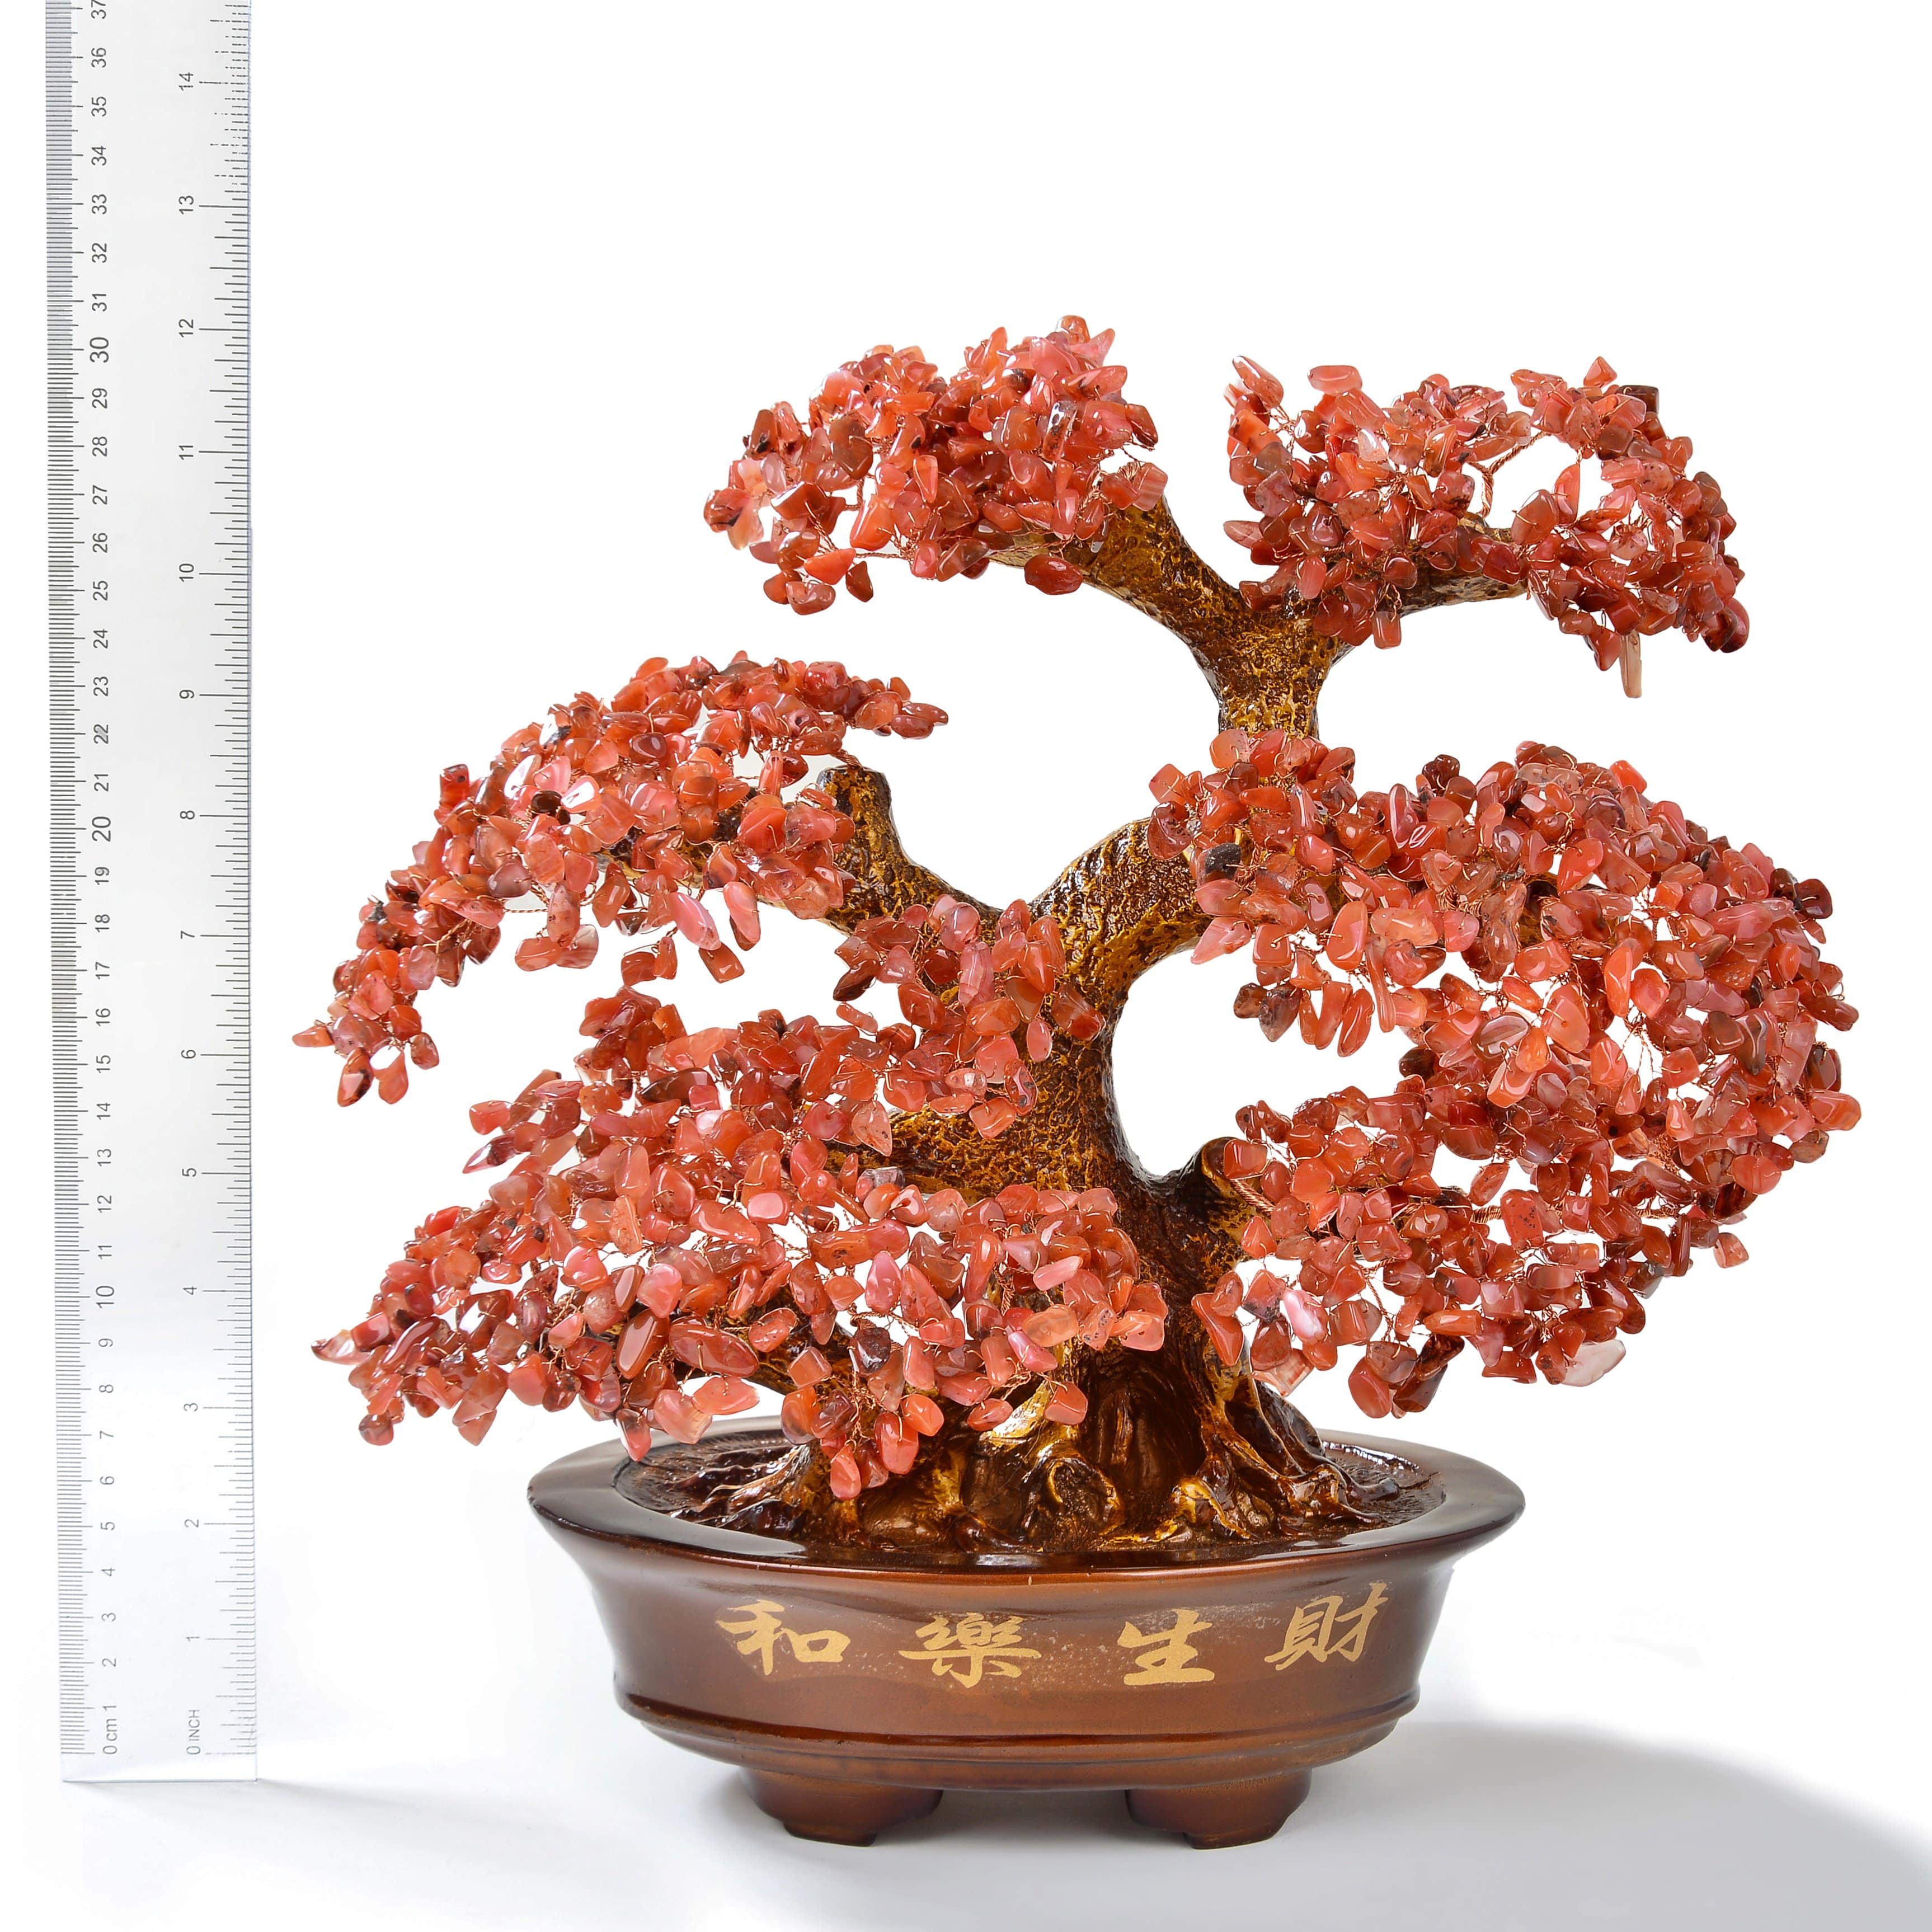 Kalifano Gemstone Trees Carnelian Tree of Life on Resin and Wood Base with 1,251 Natural Gemstones K9151-CR